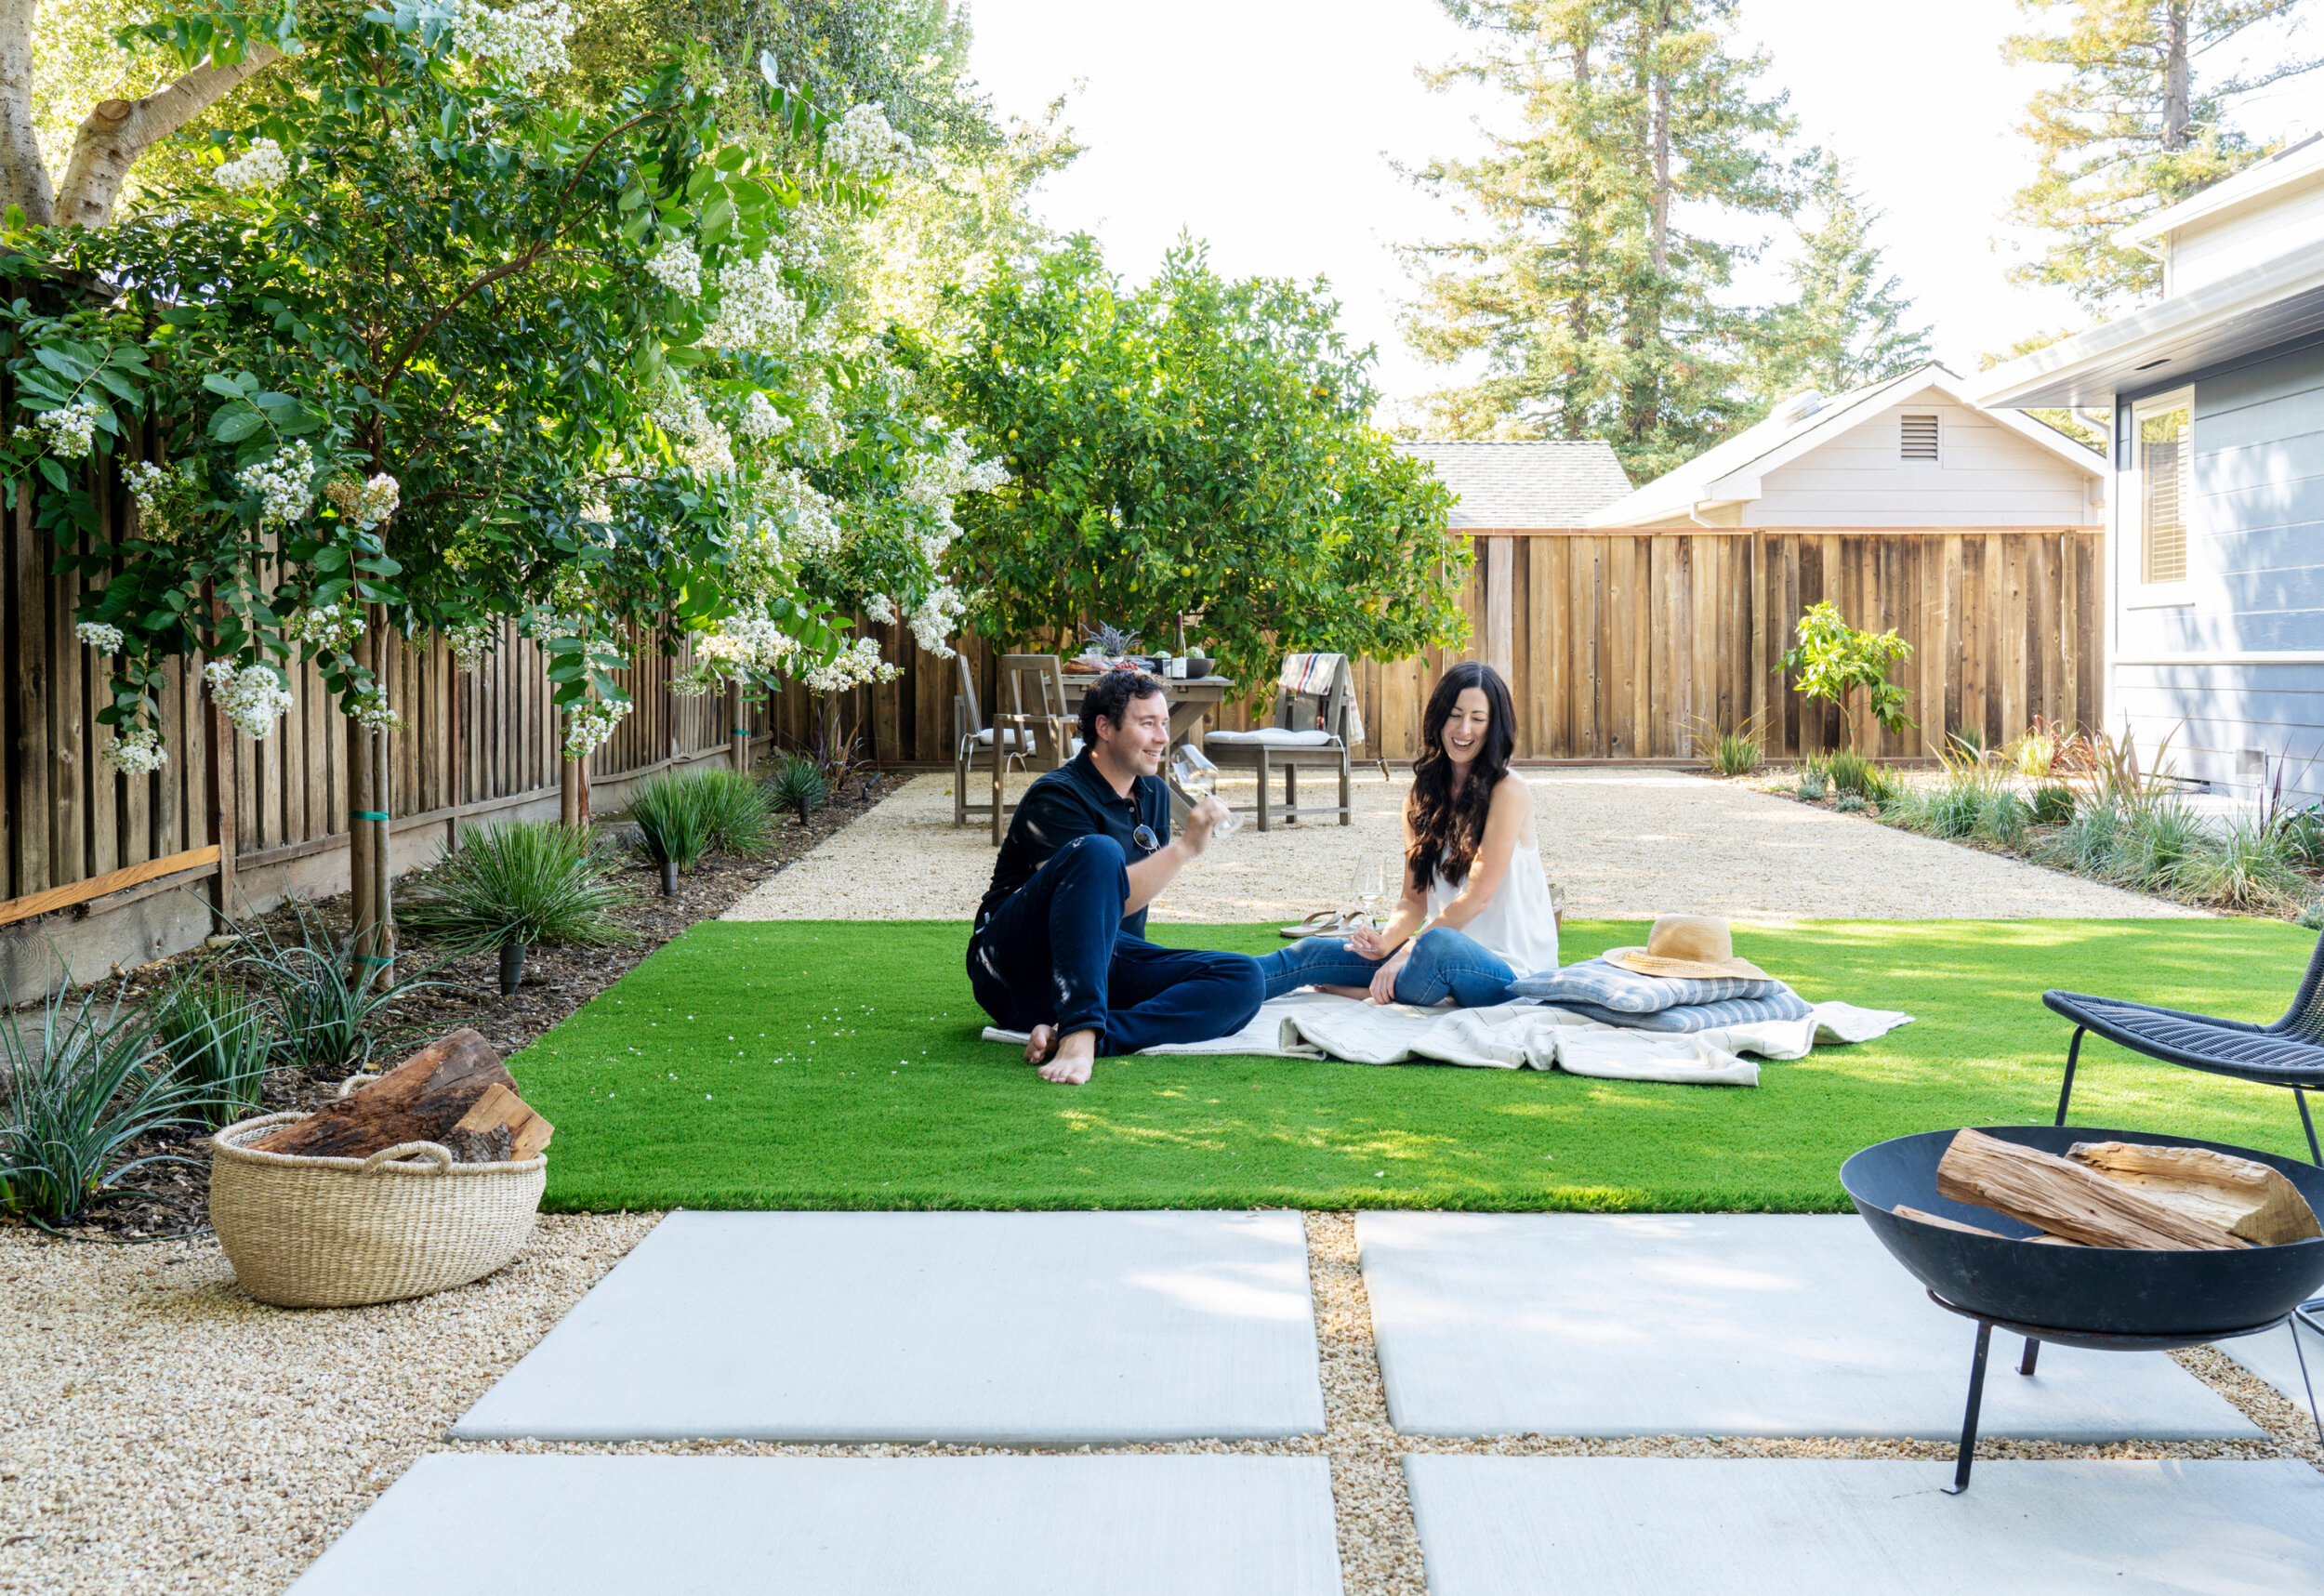 Turf in this Yardzen yard creates the perfect place to lay out a picnic blank and enjoy a glass of wine.